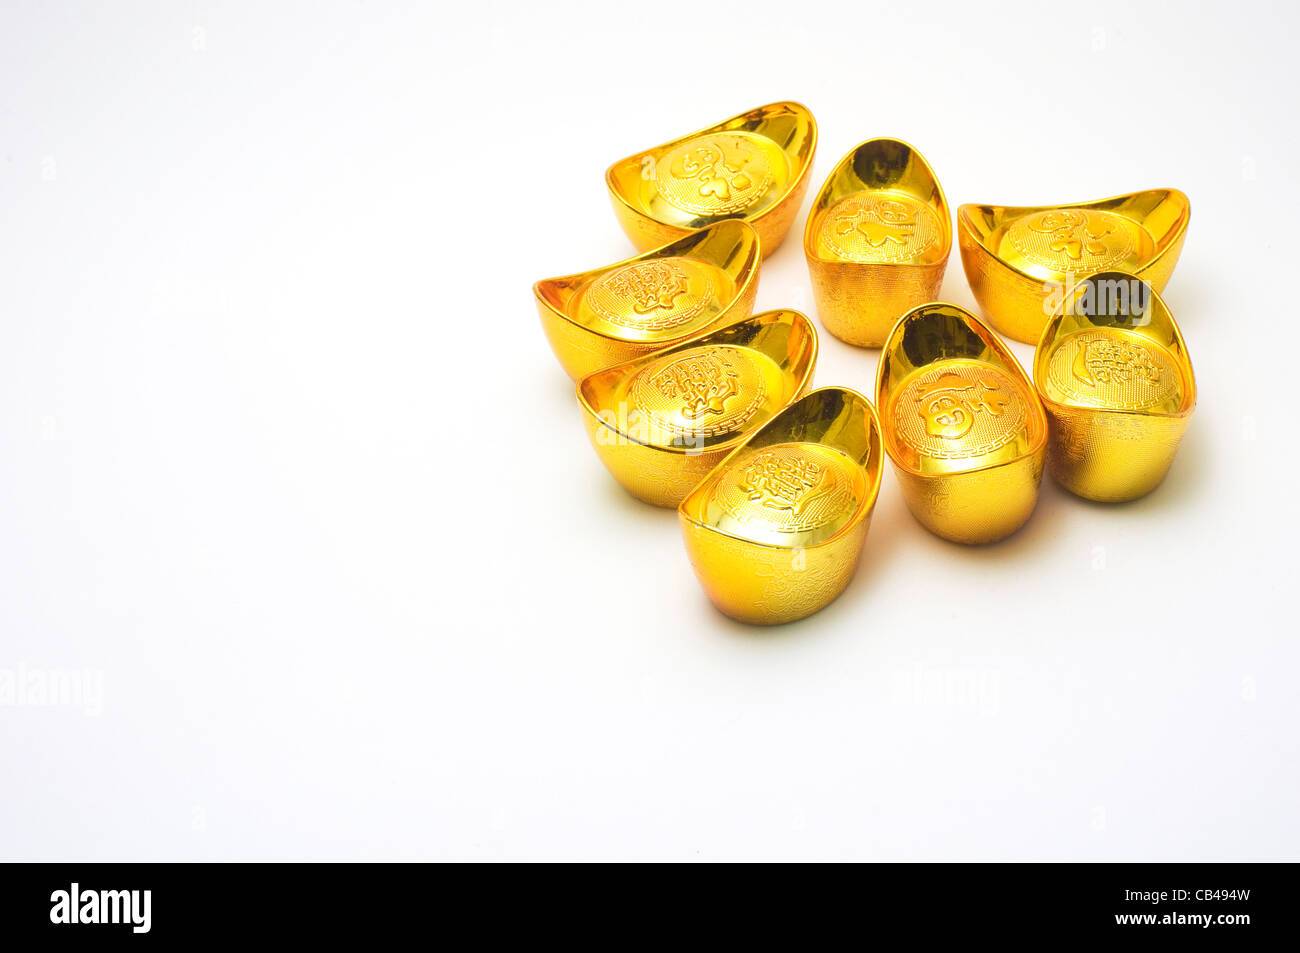 chinese gold ingots, a symbol of wealth for chinese. Stock Photo